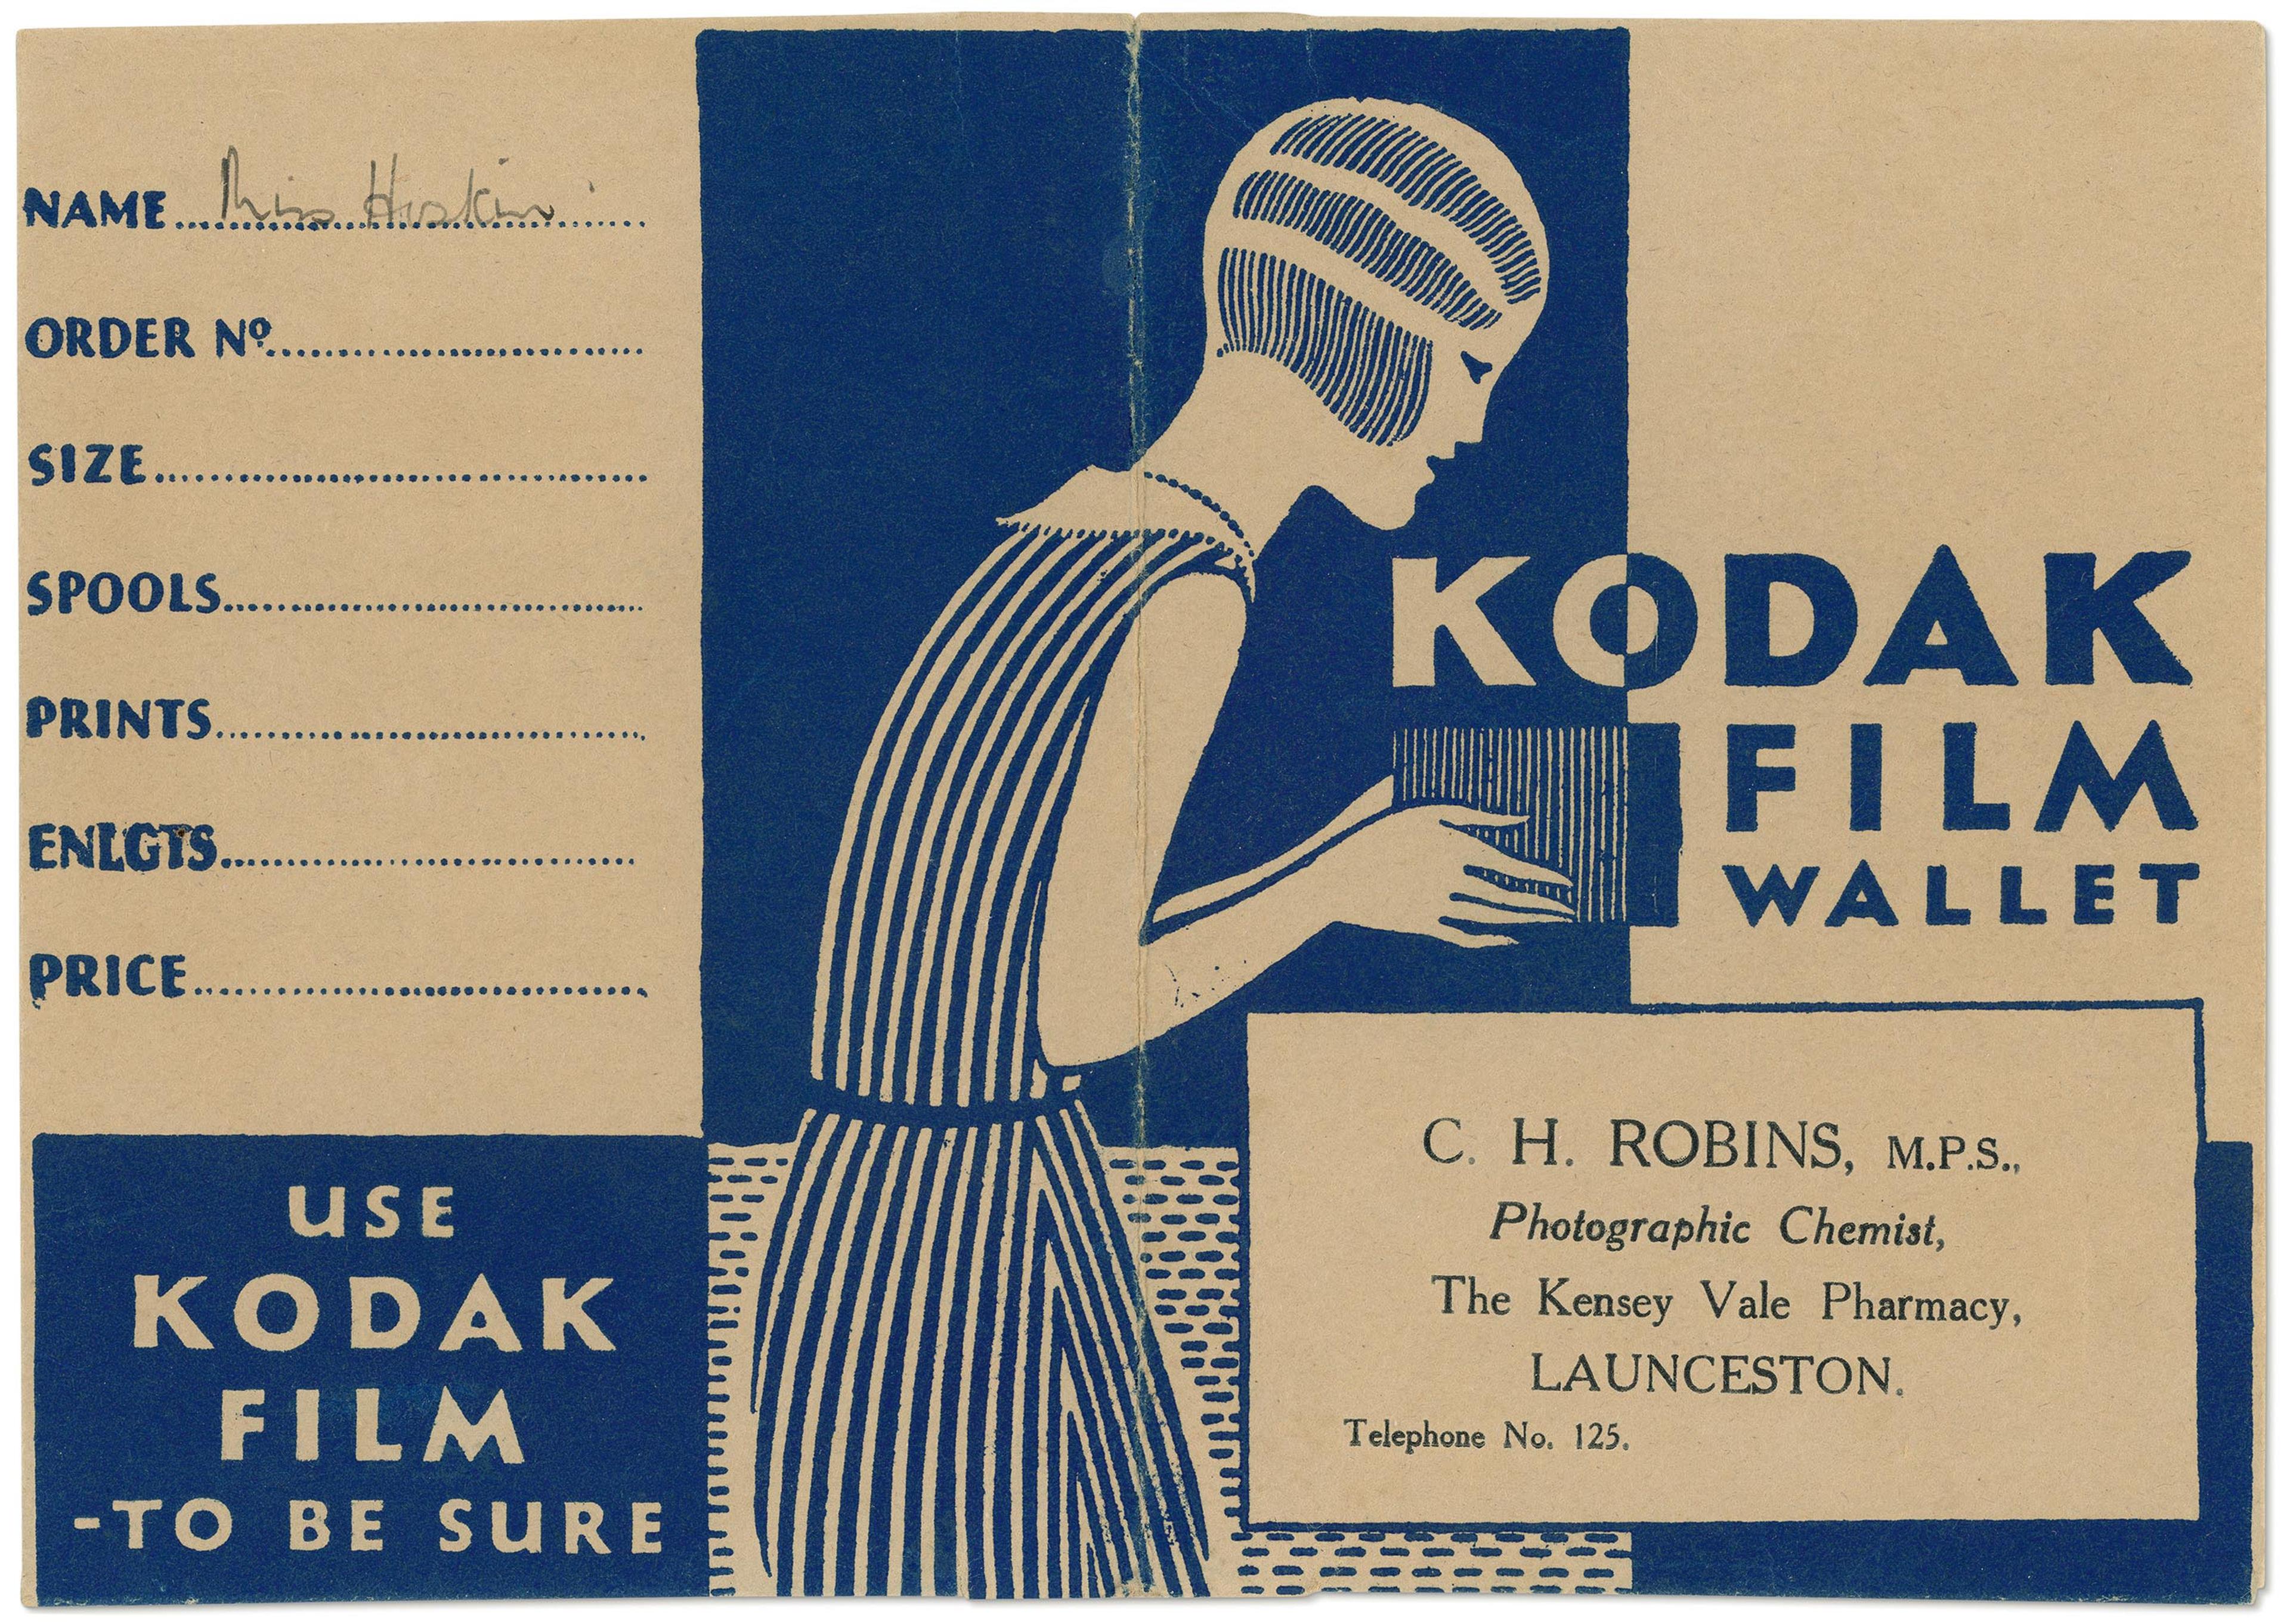 Photo of a paper envelope featuring a blue and white illustration of a person holding an envelope with the text 'Kodak film wallet' 'use Kodak film - to be sure', along with a space to write details such as name, order number, size etc. along with the address of 'C. H. Robins M.P.S Photographic Chemist'.